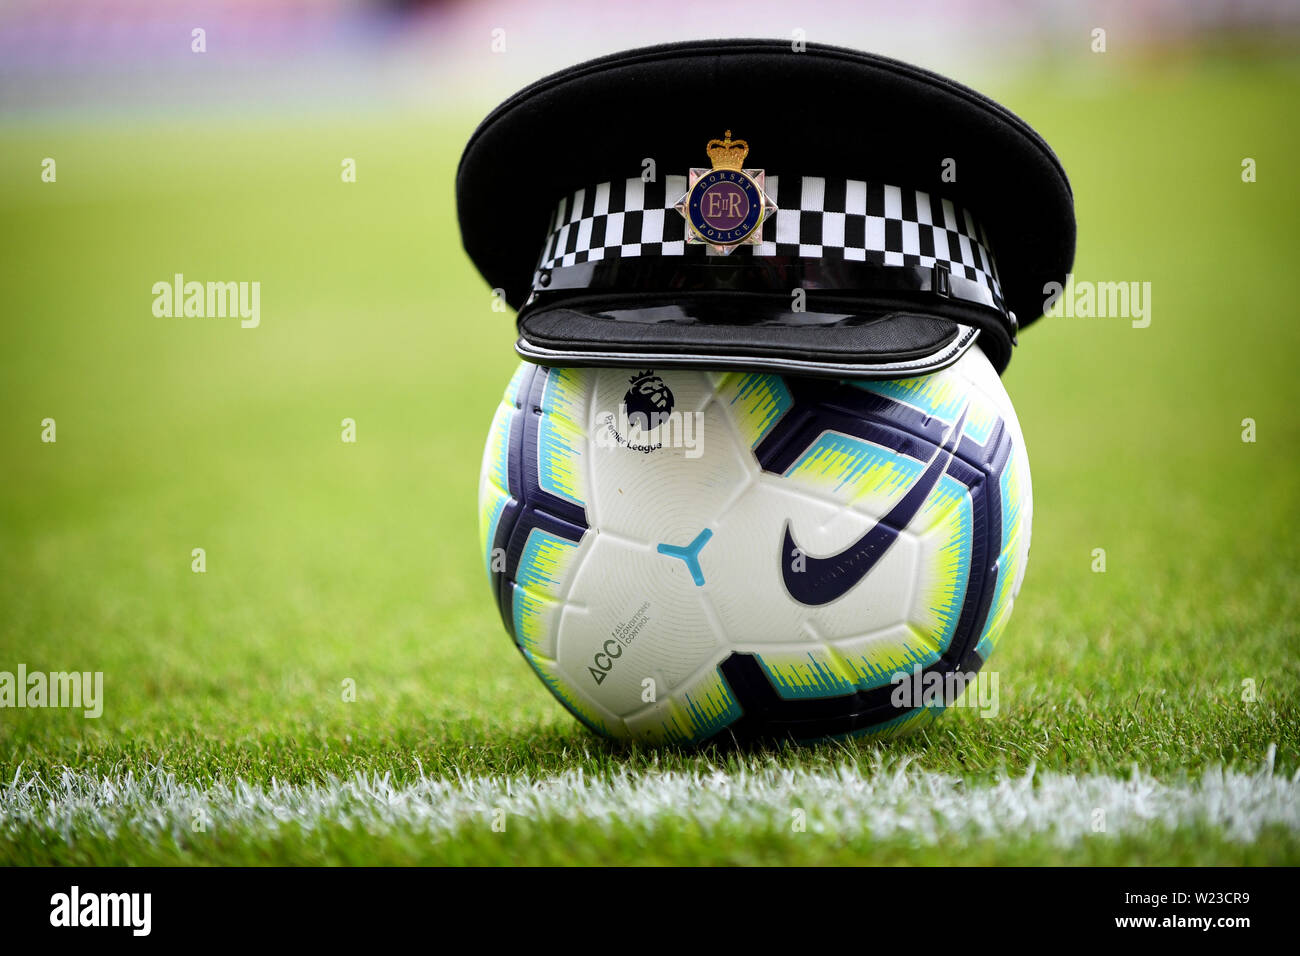 The Nike Merlin, Official Premier League Ball for the 2018/19 season after  a Dorset Constabulary Officer placed his cap on it - AFC Bournemouth v  Cardiff City, Premier League, Vitality Stadium, Bournemouth -